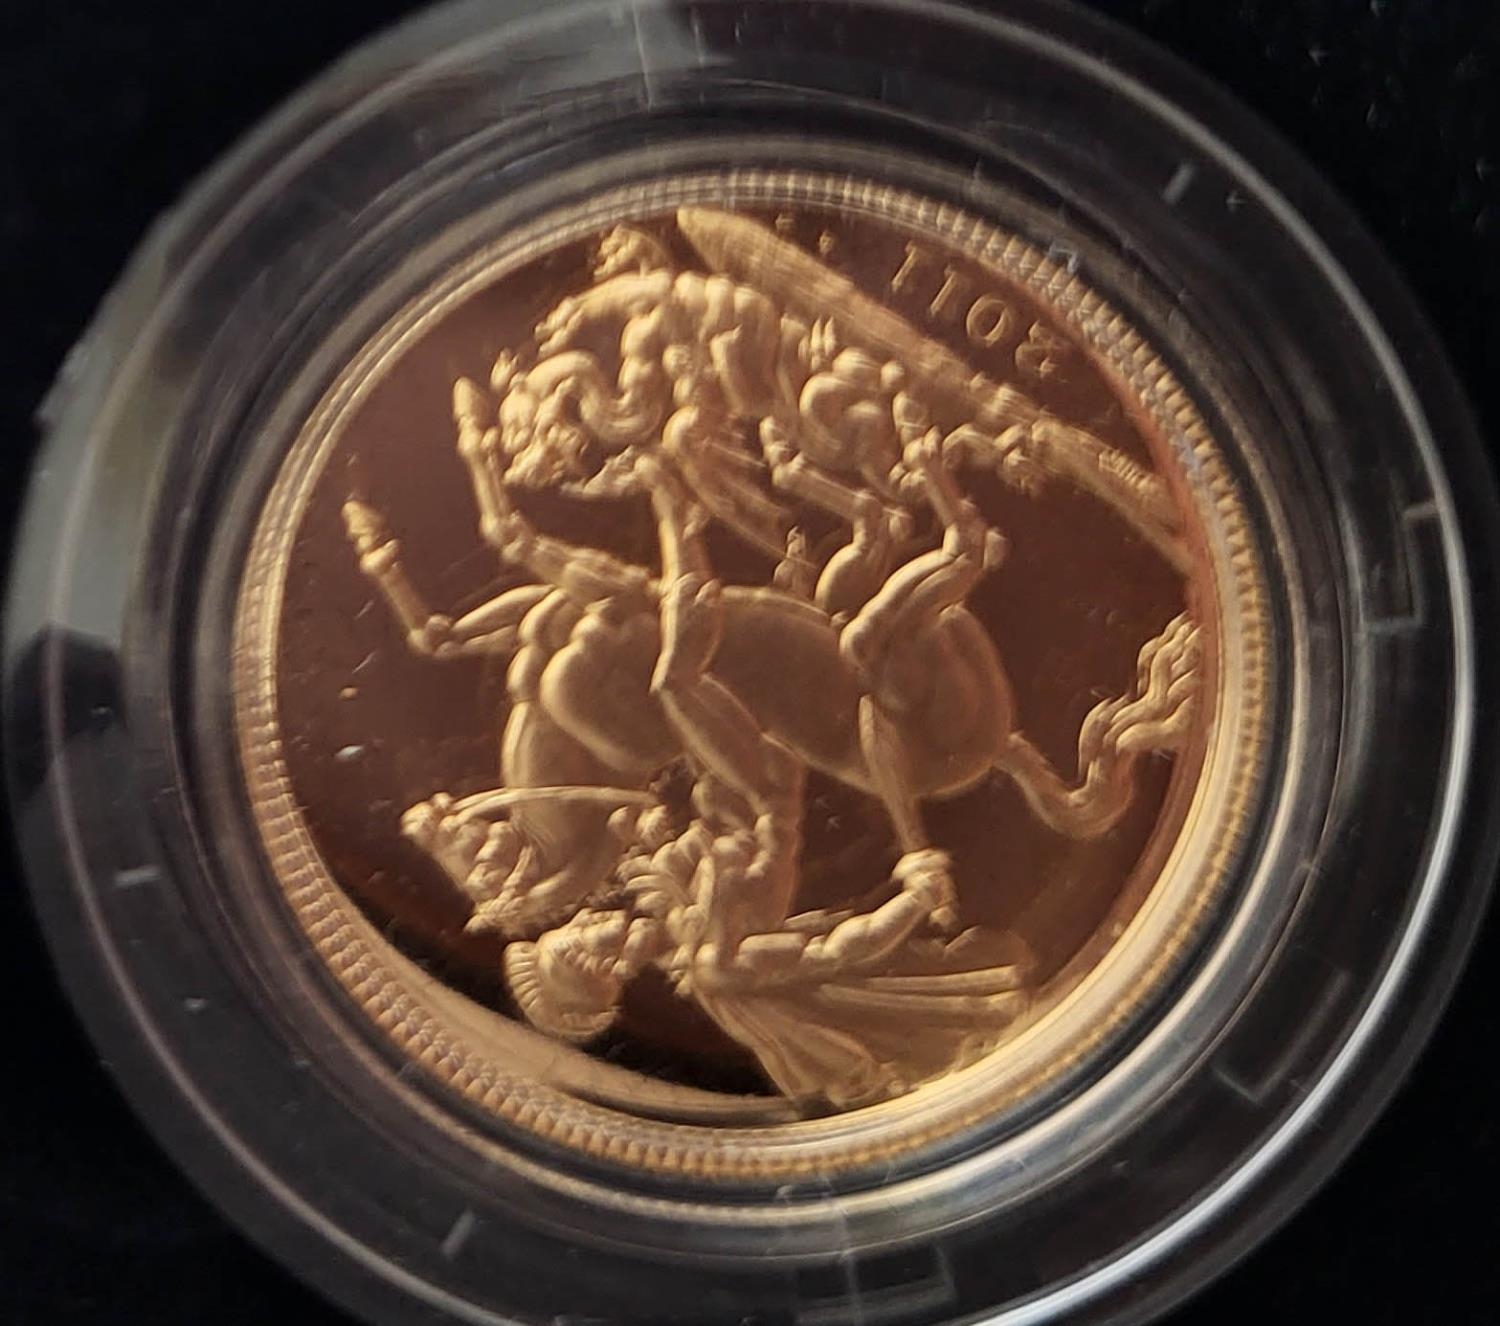 A 22CT GOLD FULL SOVEREIGN PROOF COIN, DATED 2011 With George and Dragon to reverse, in a protective - Image 3 of 5